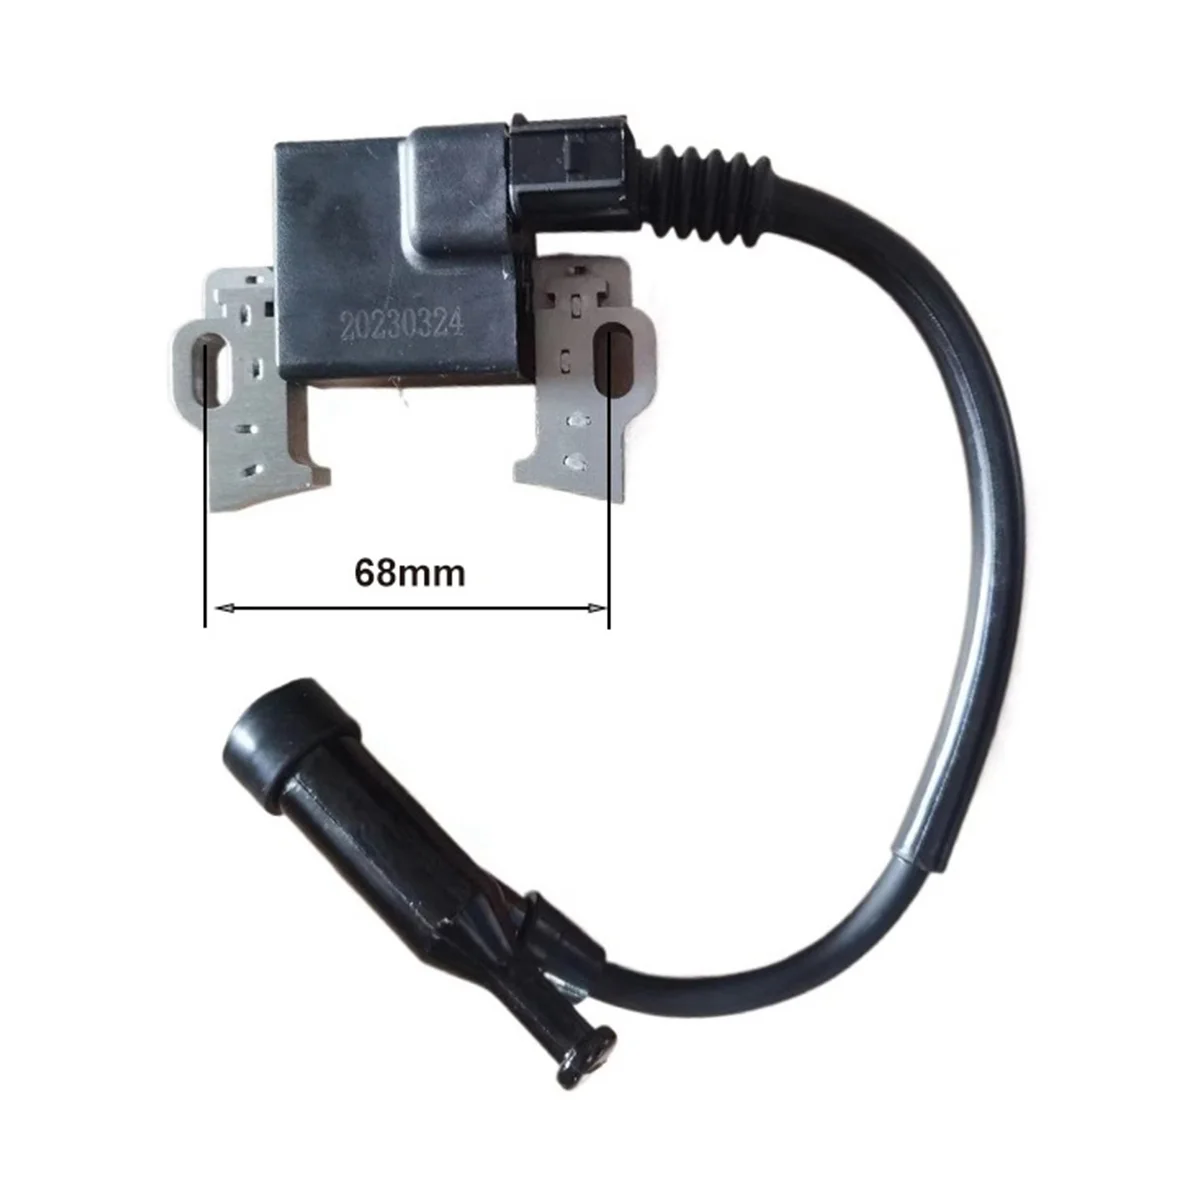 

High Voltage Package Ignition Coil Lawn Mower Accessories for Honda GX340 GX390 30500-Z5T-003 Lawn Mower